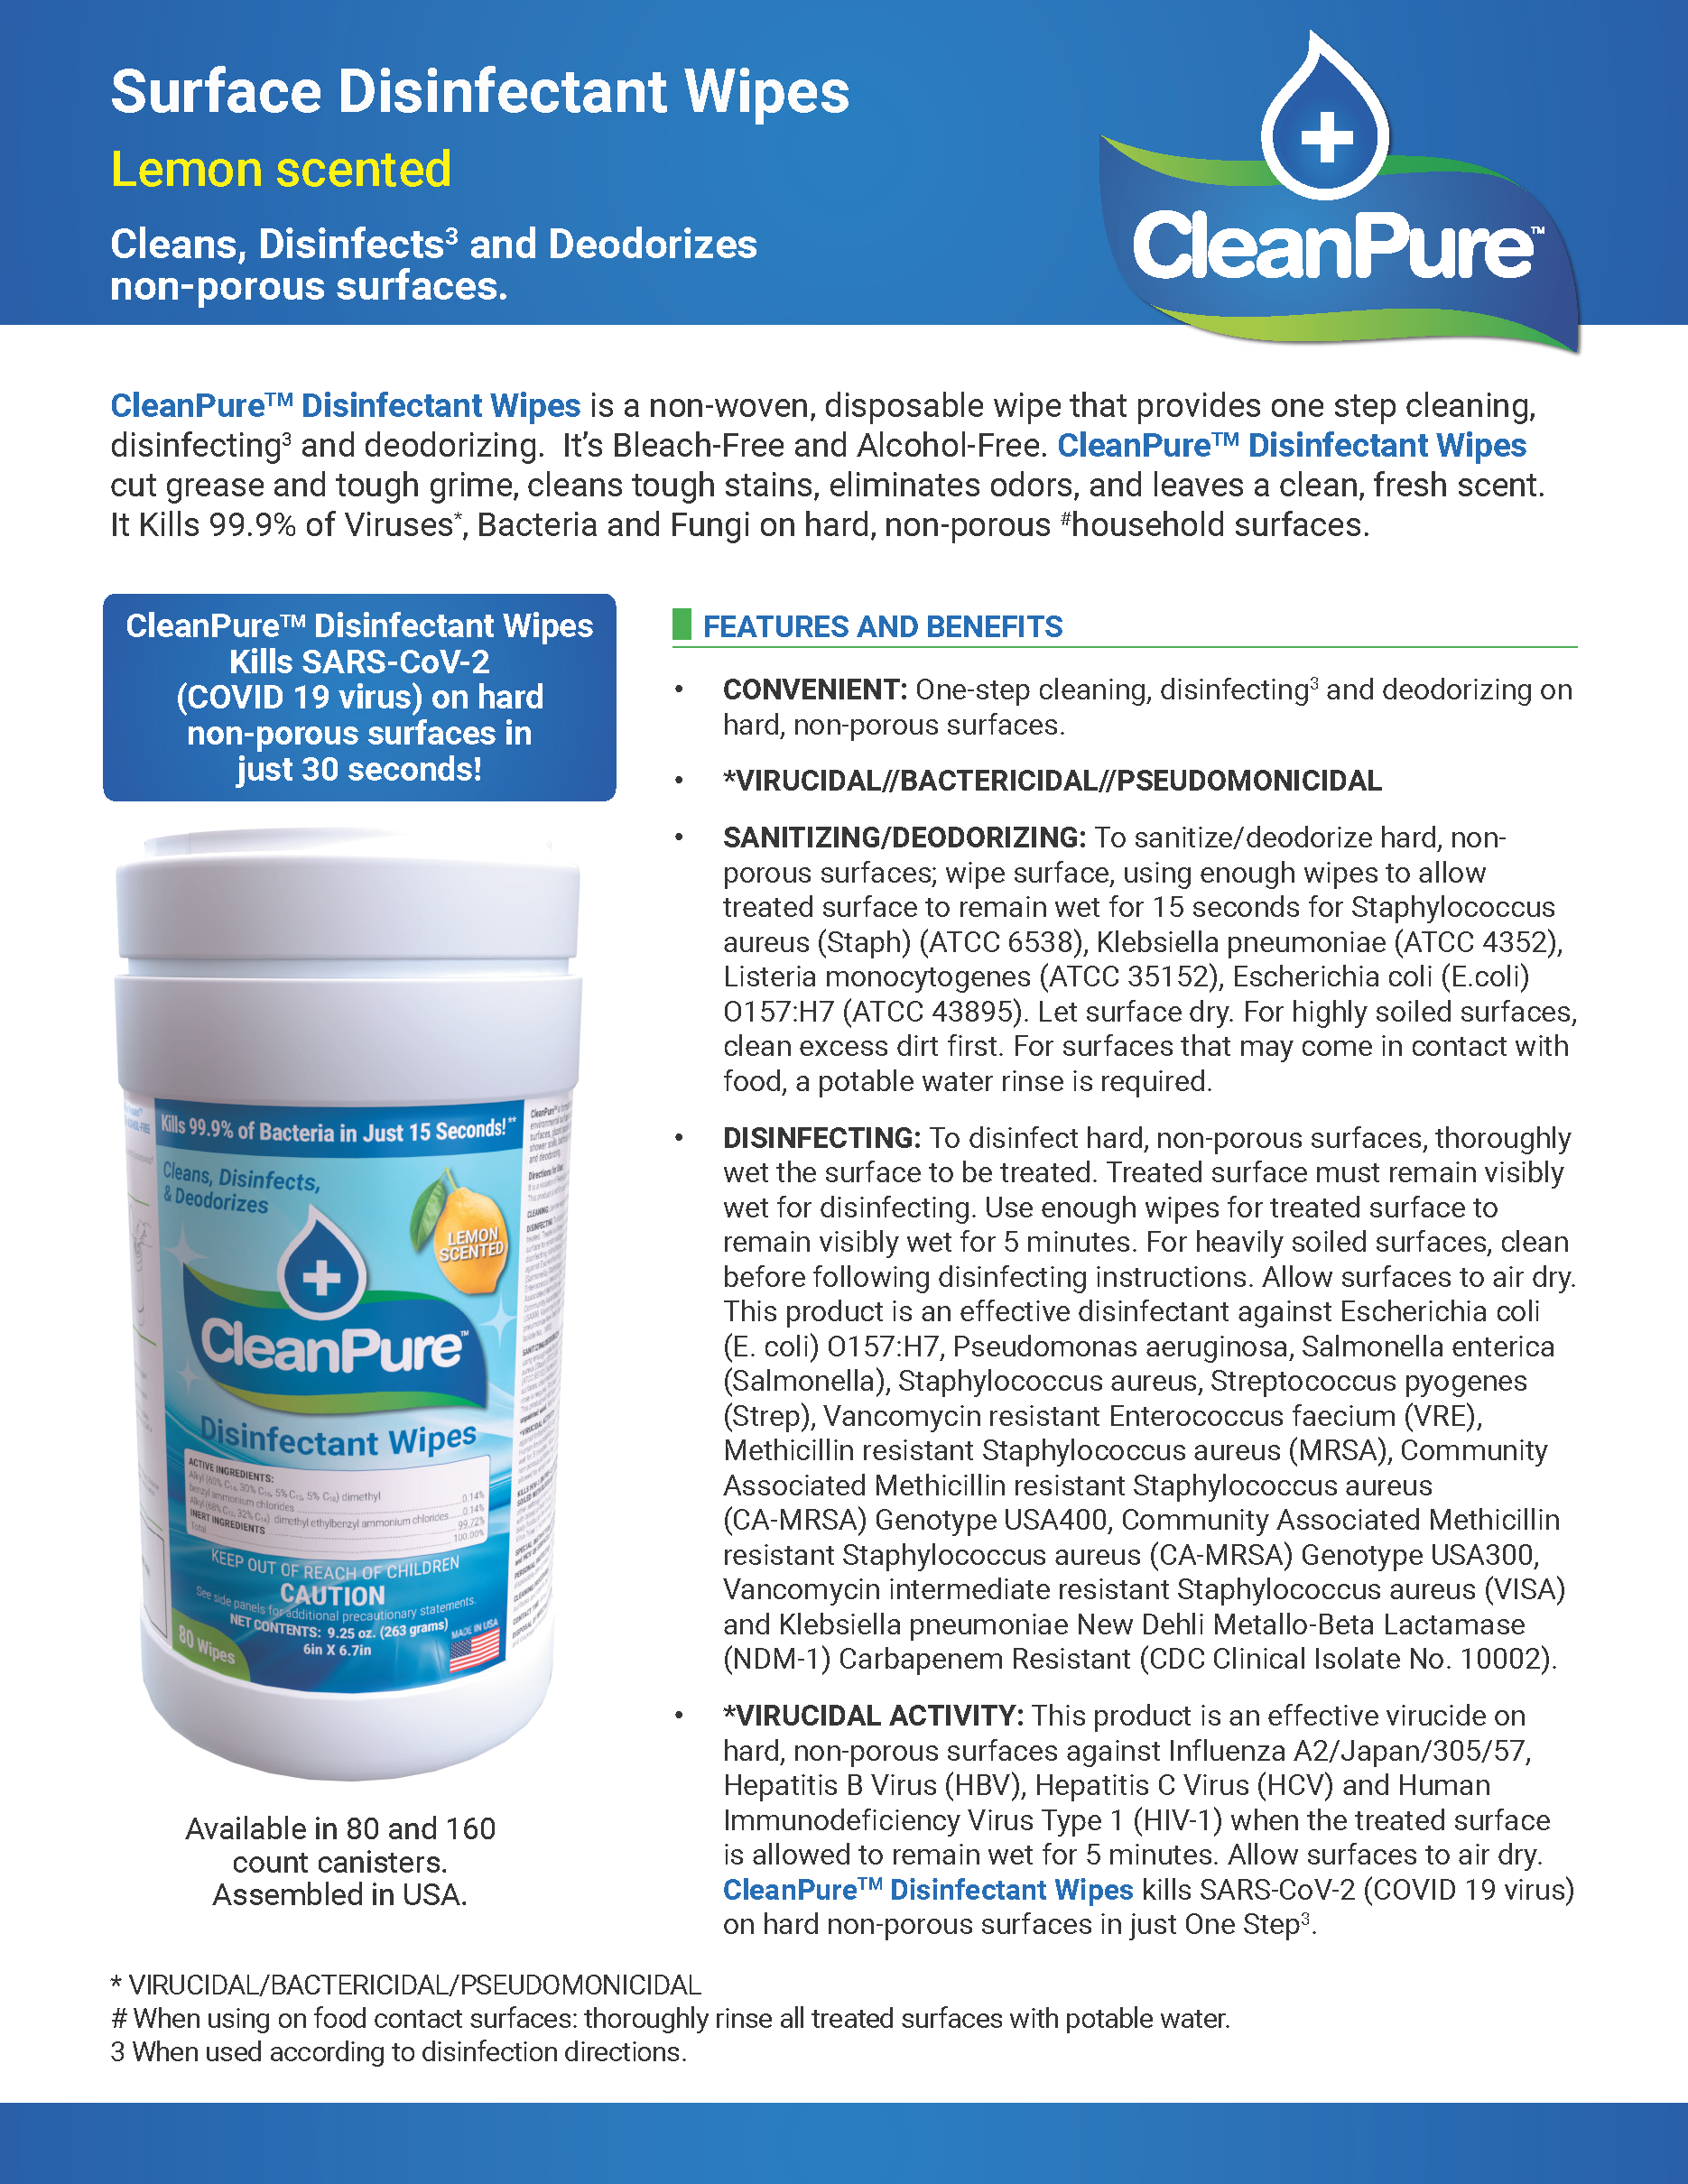 #E3300 RXS - Stat Sheets - CleanPure WIPES 005 Blank 06212021_Page_1